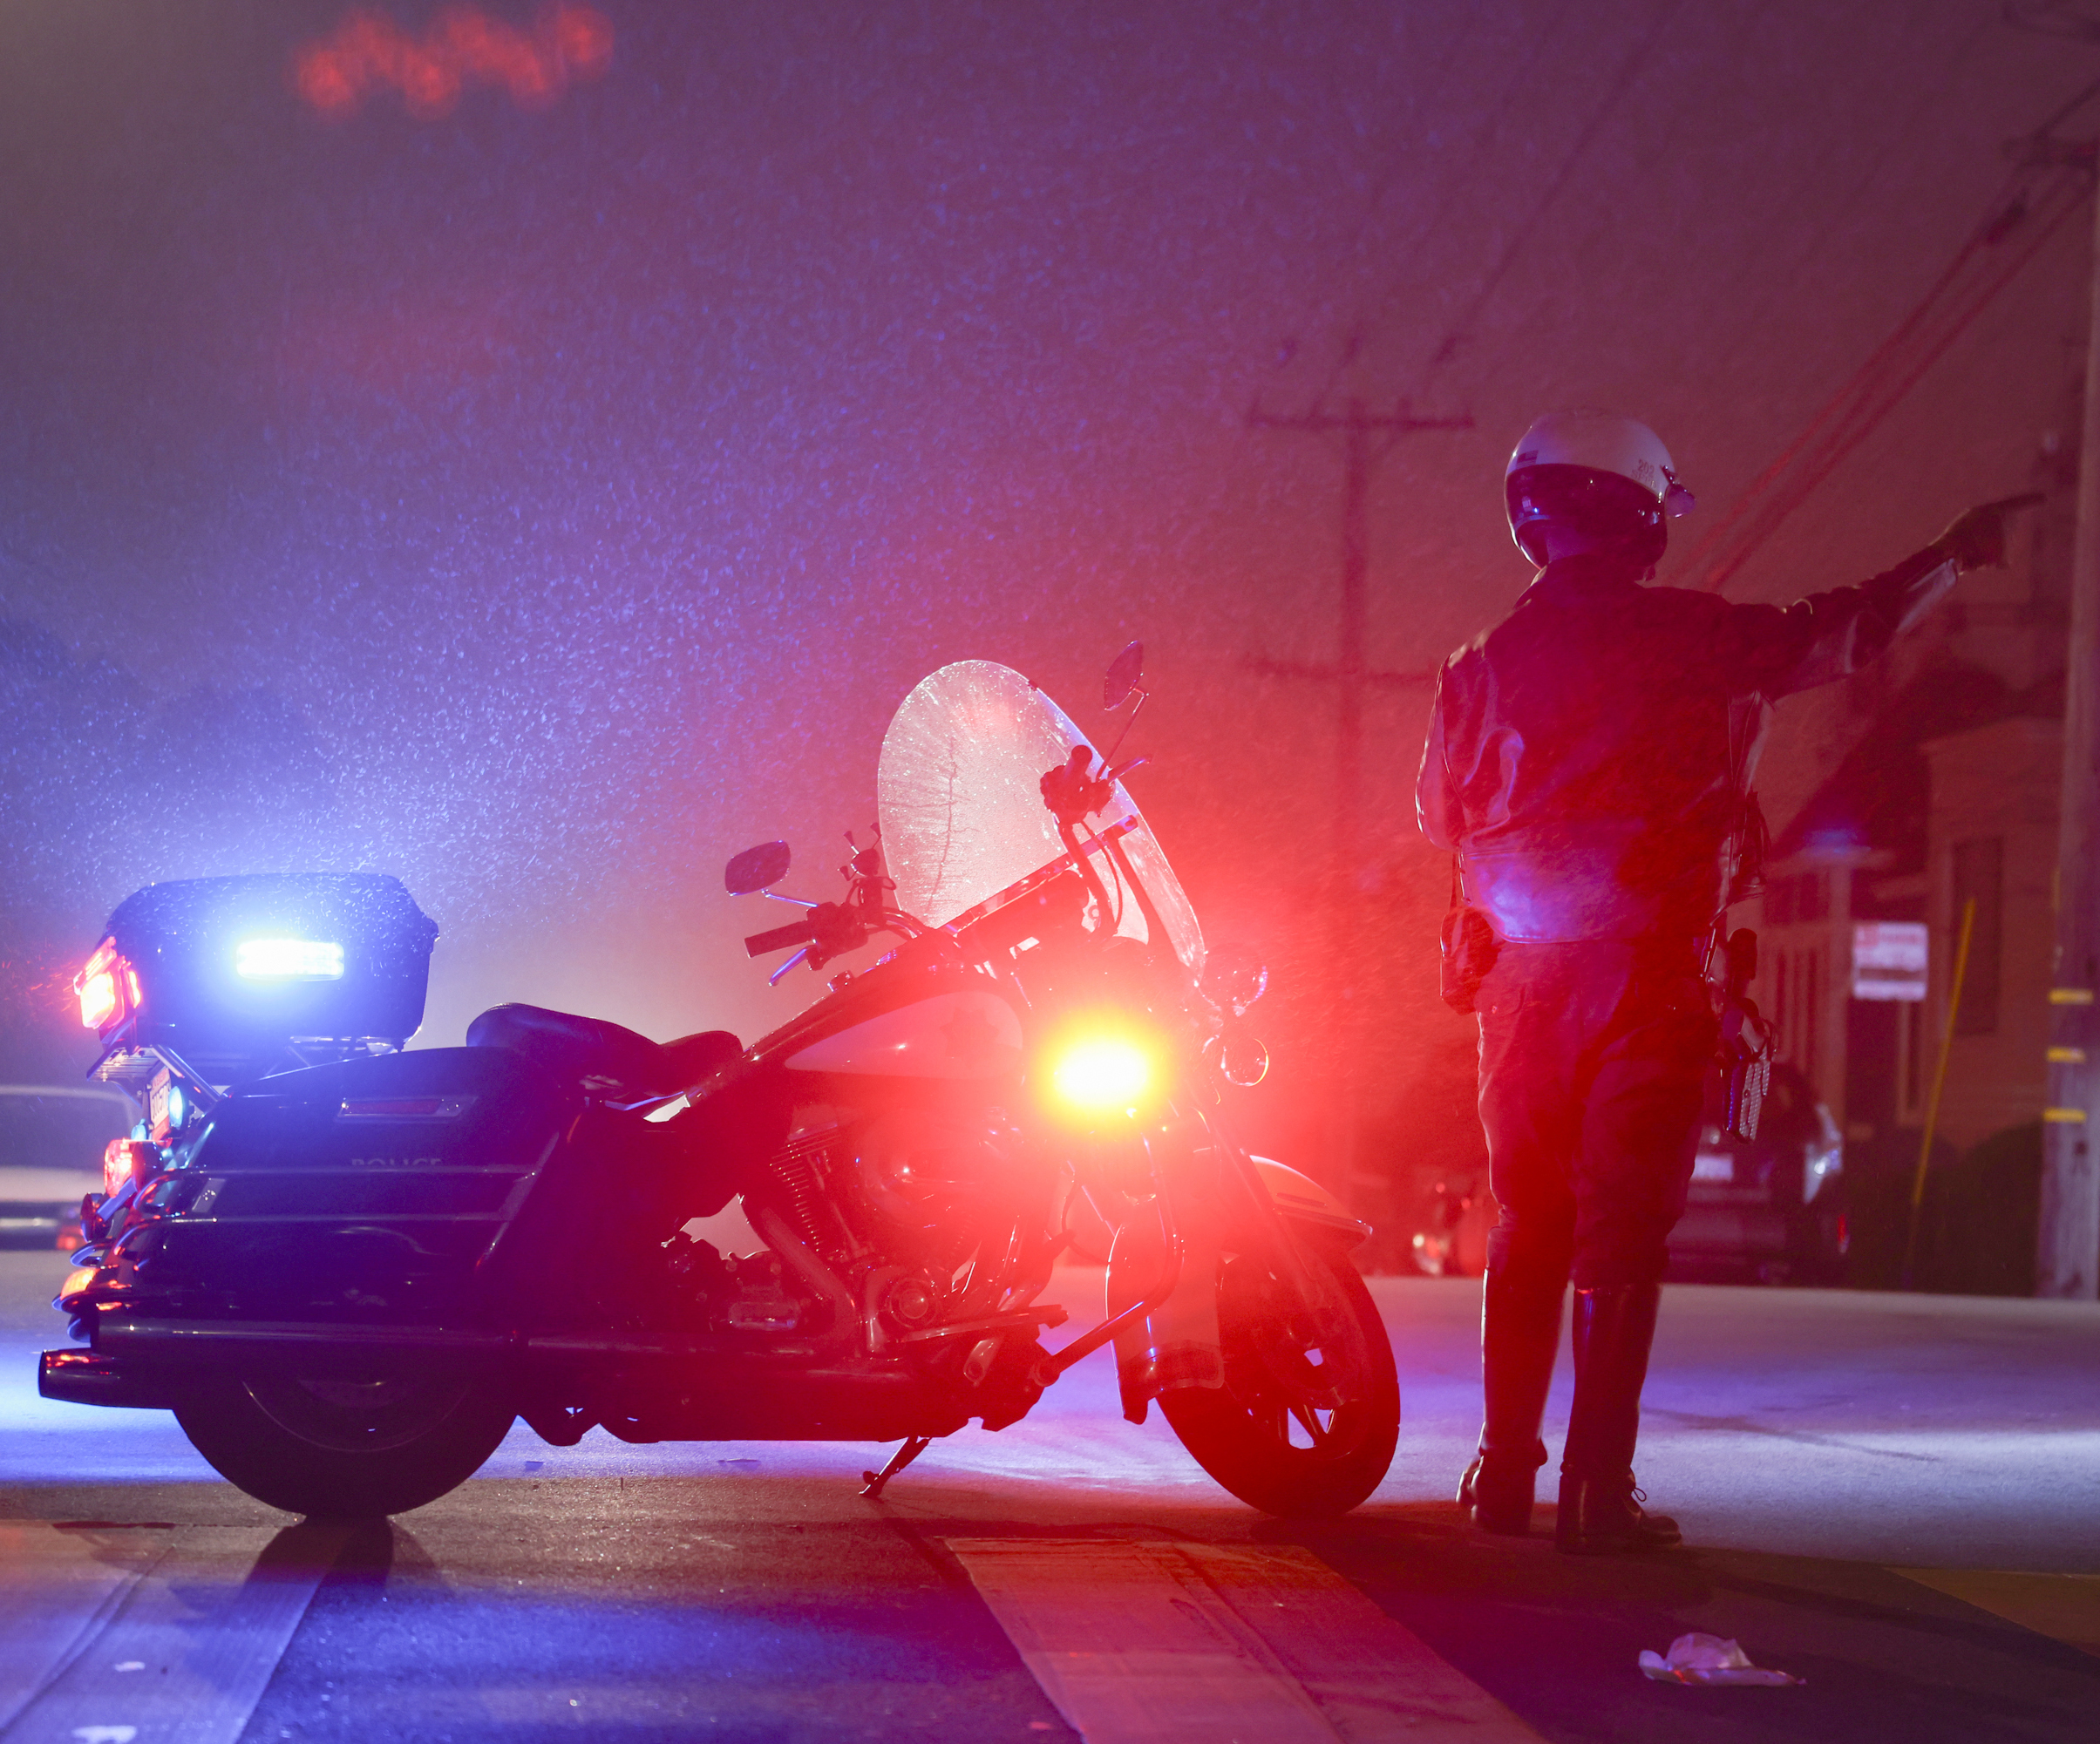 A police officer beside their motorcycle at night, pointing ahead, with emergency lights on.